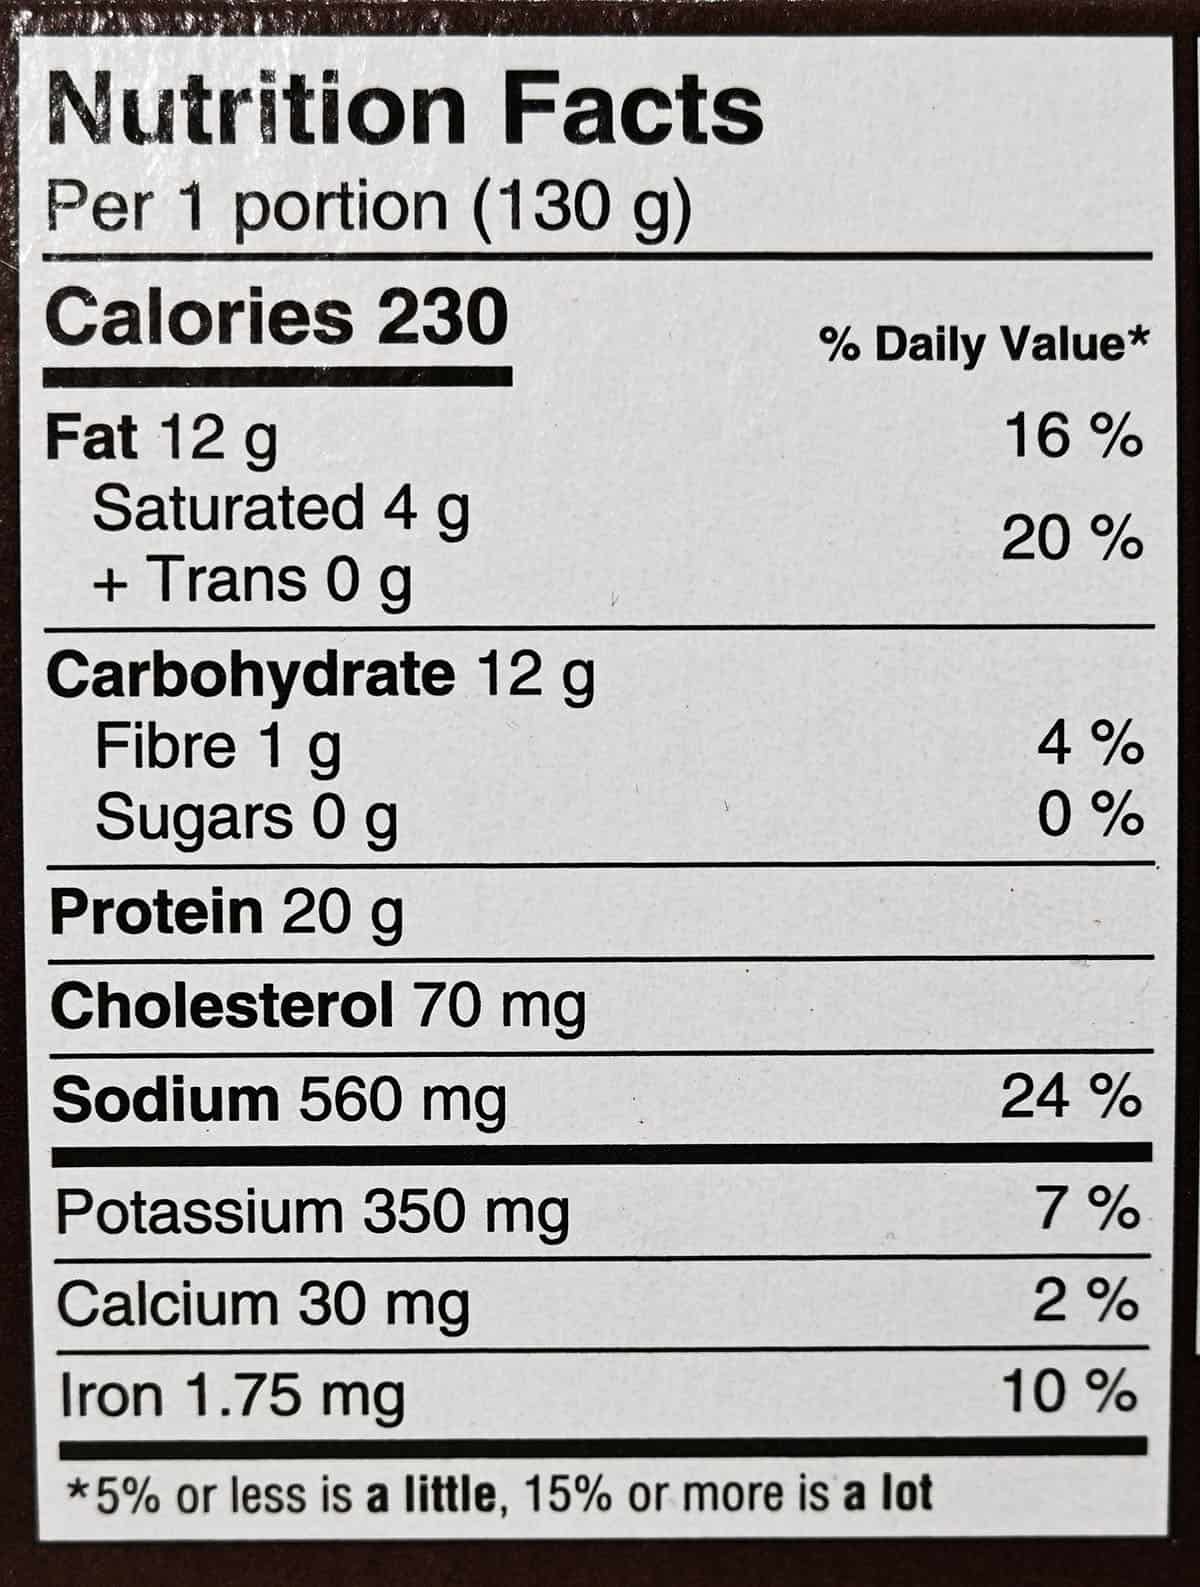 Nutrition facts from the box.